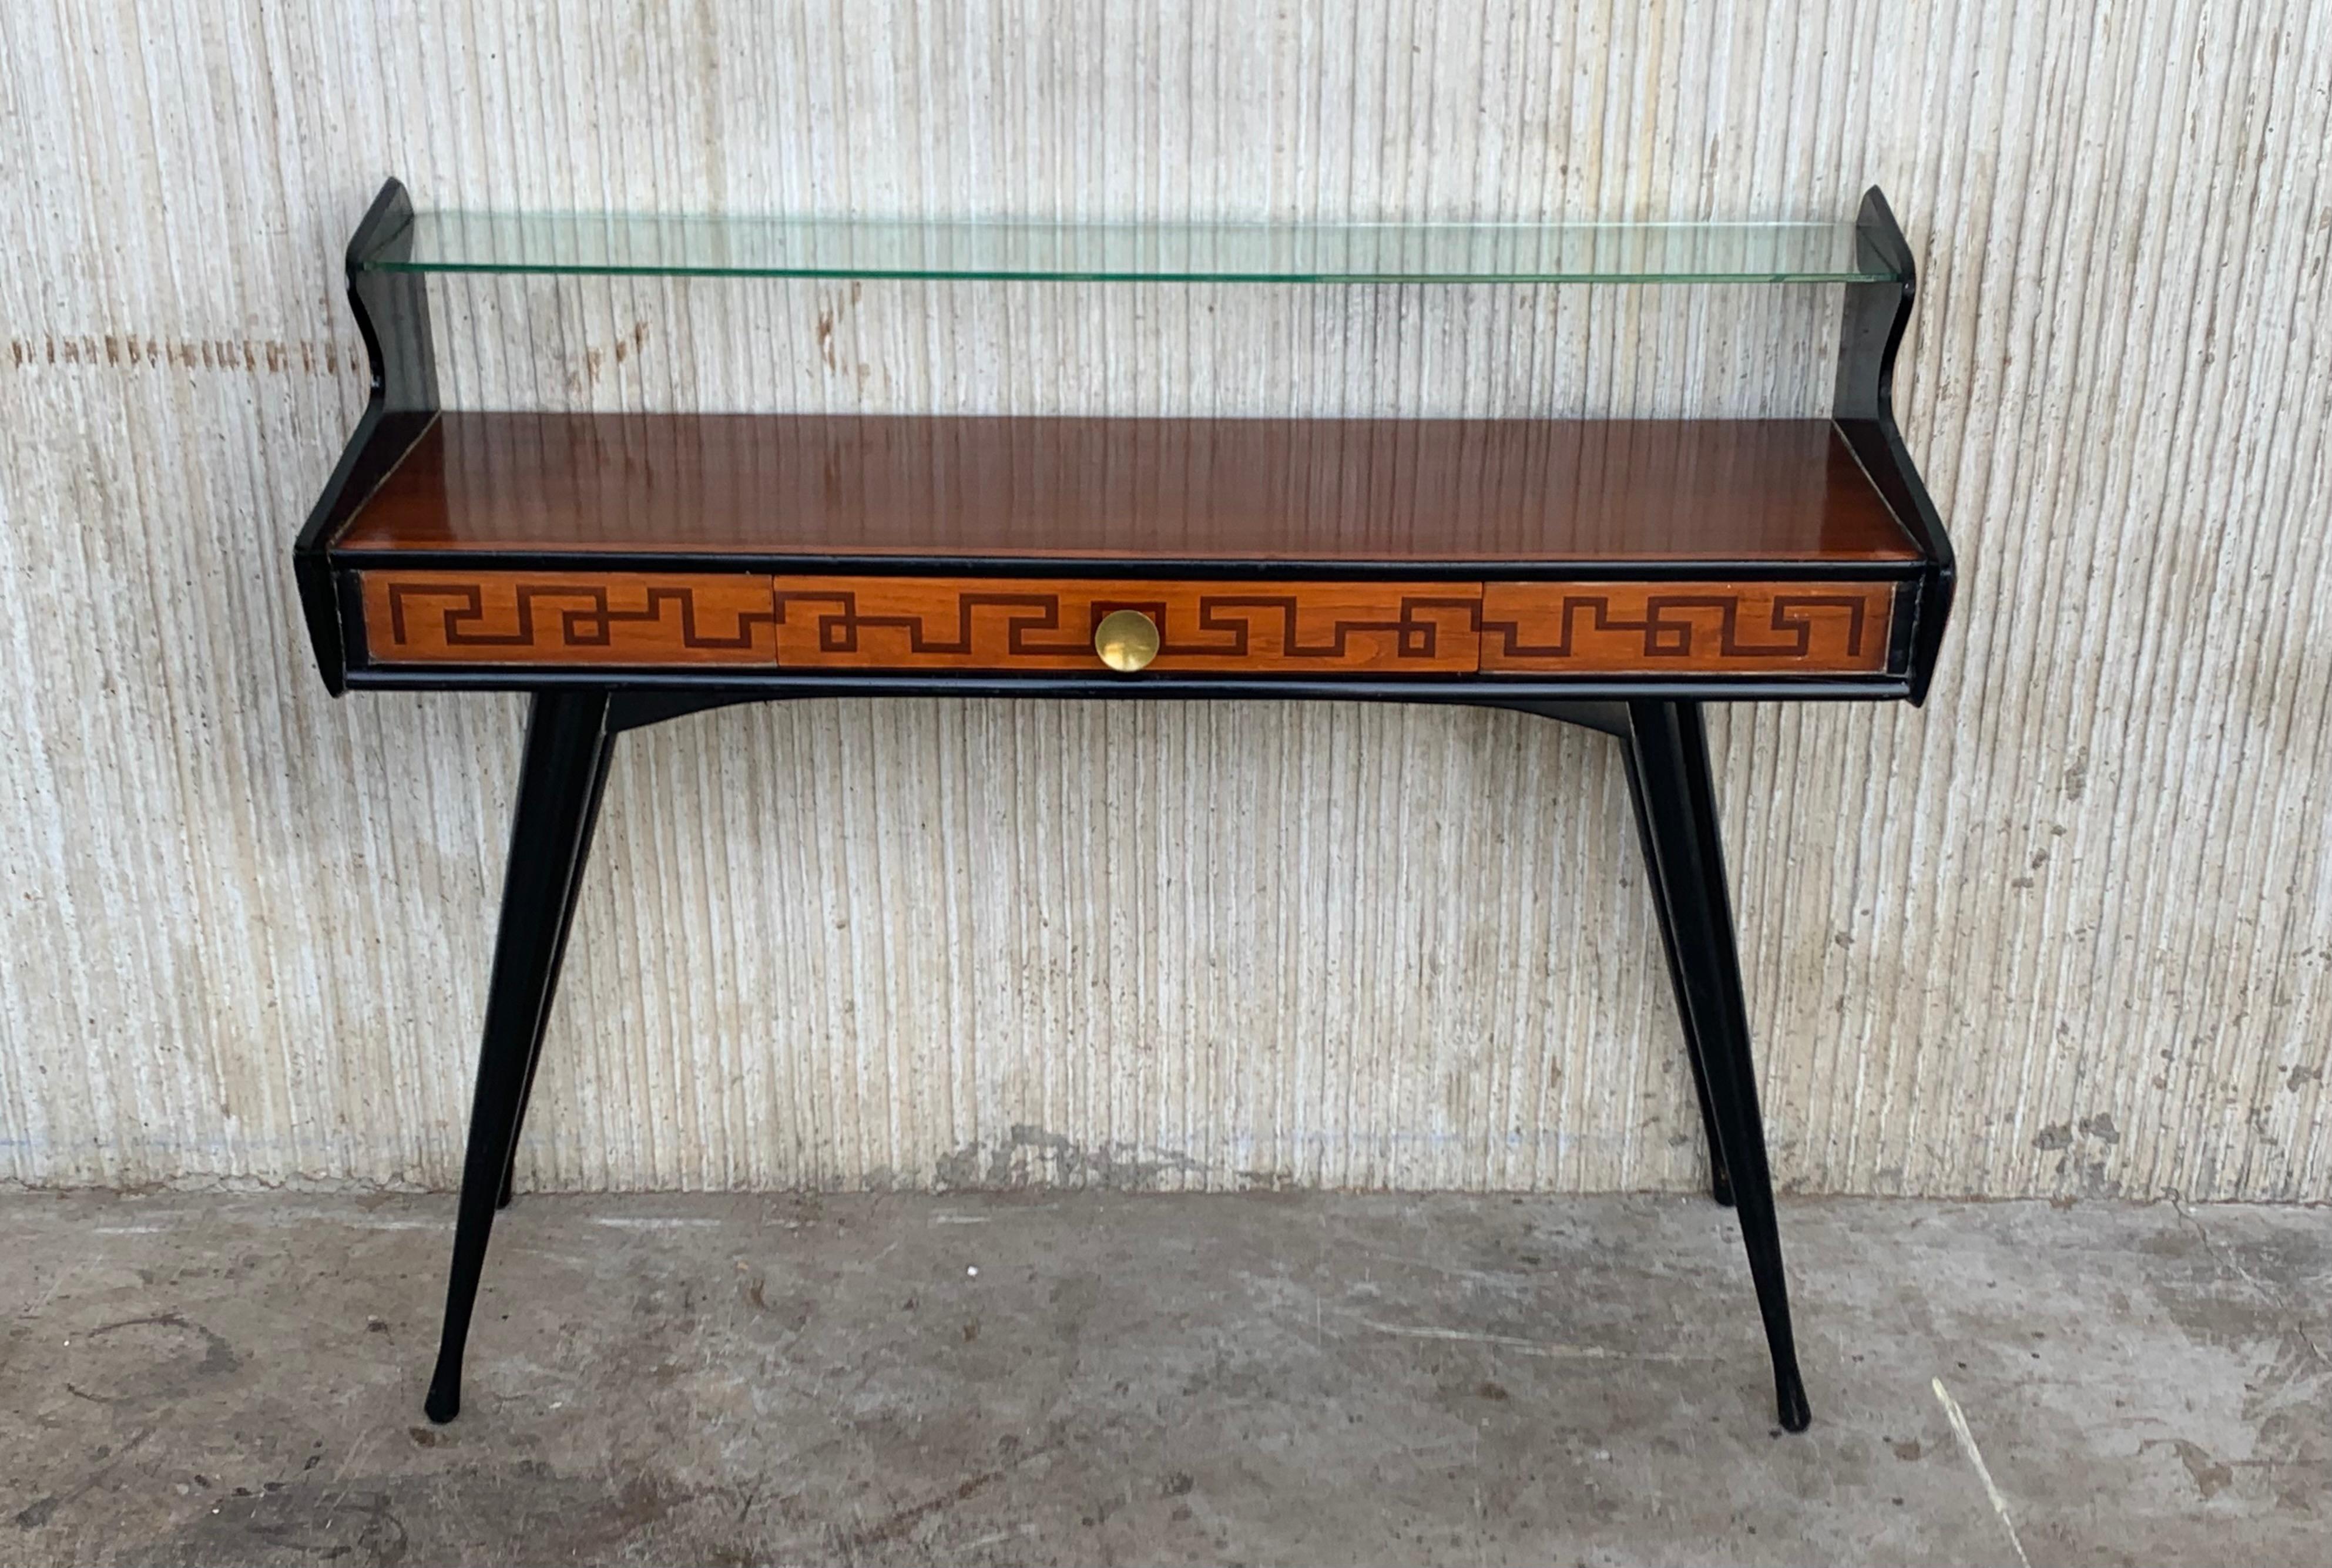 Italian Mid-Century Modern Console Table with High Glass Shelve, Ico Parisi Style